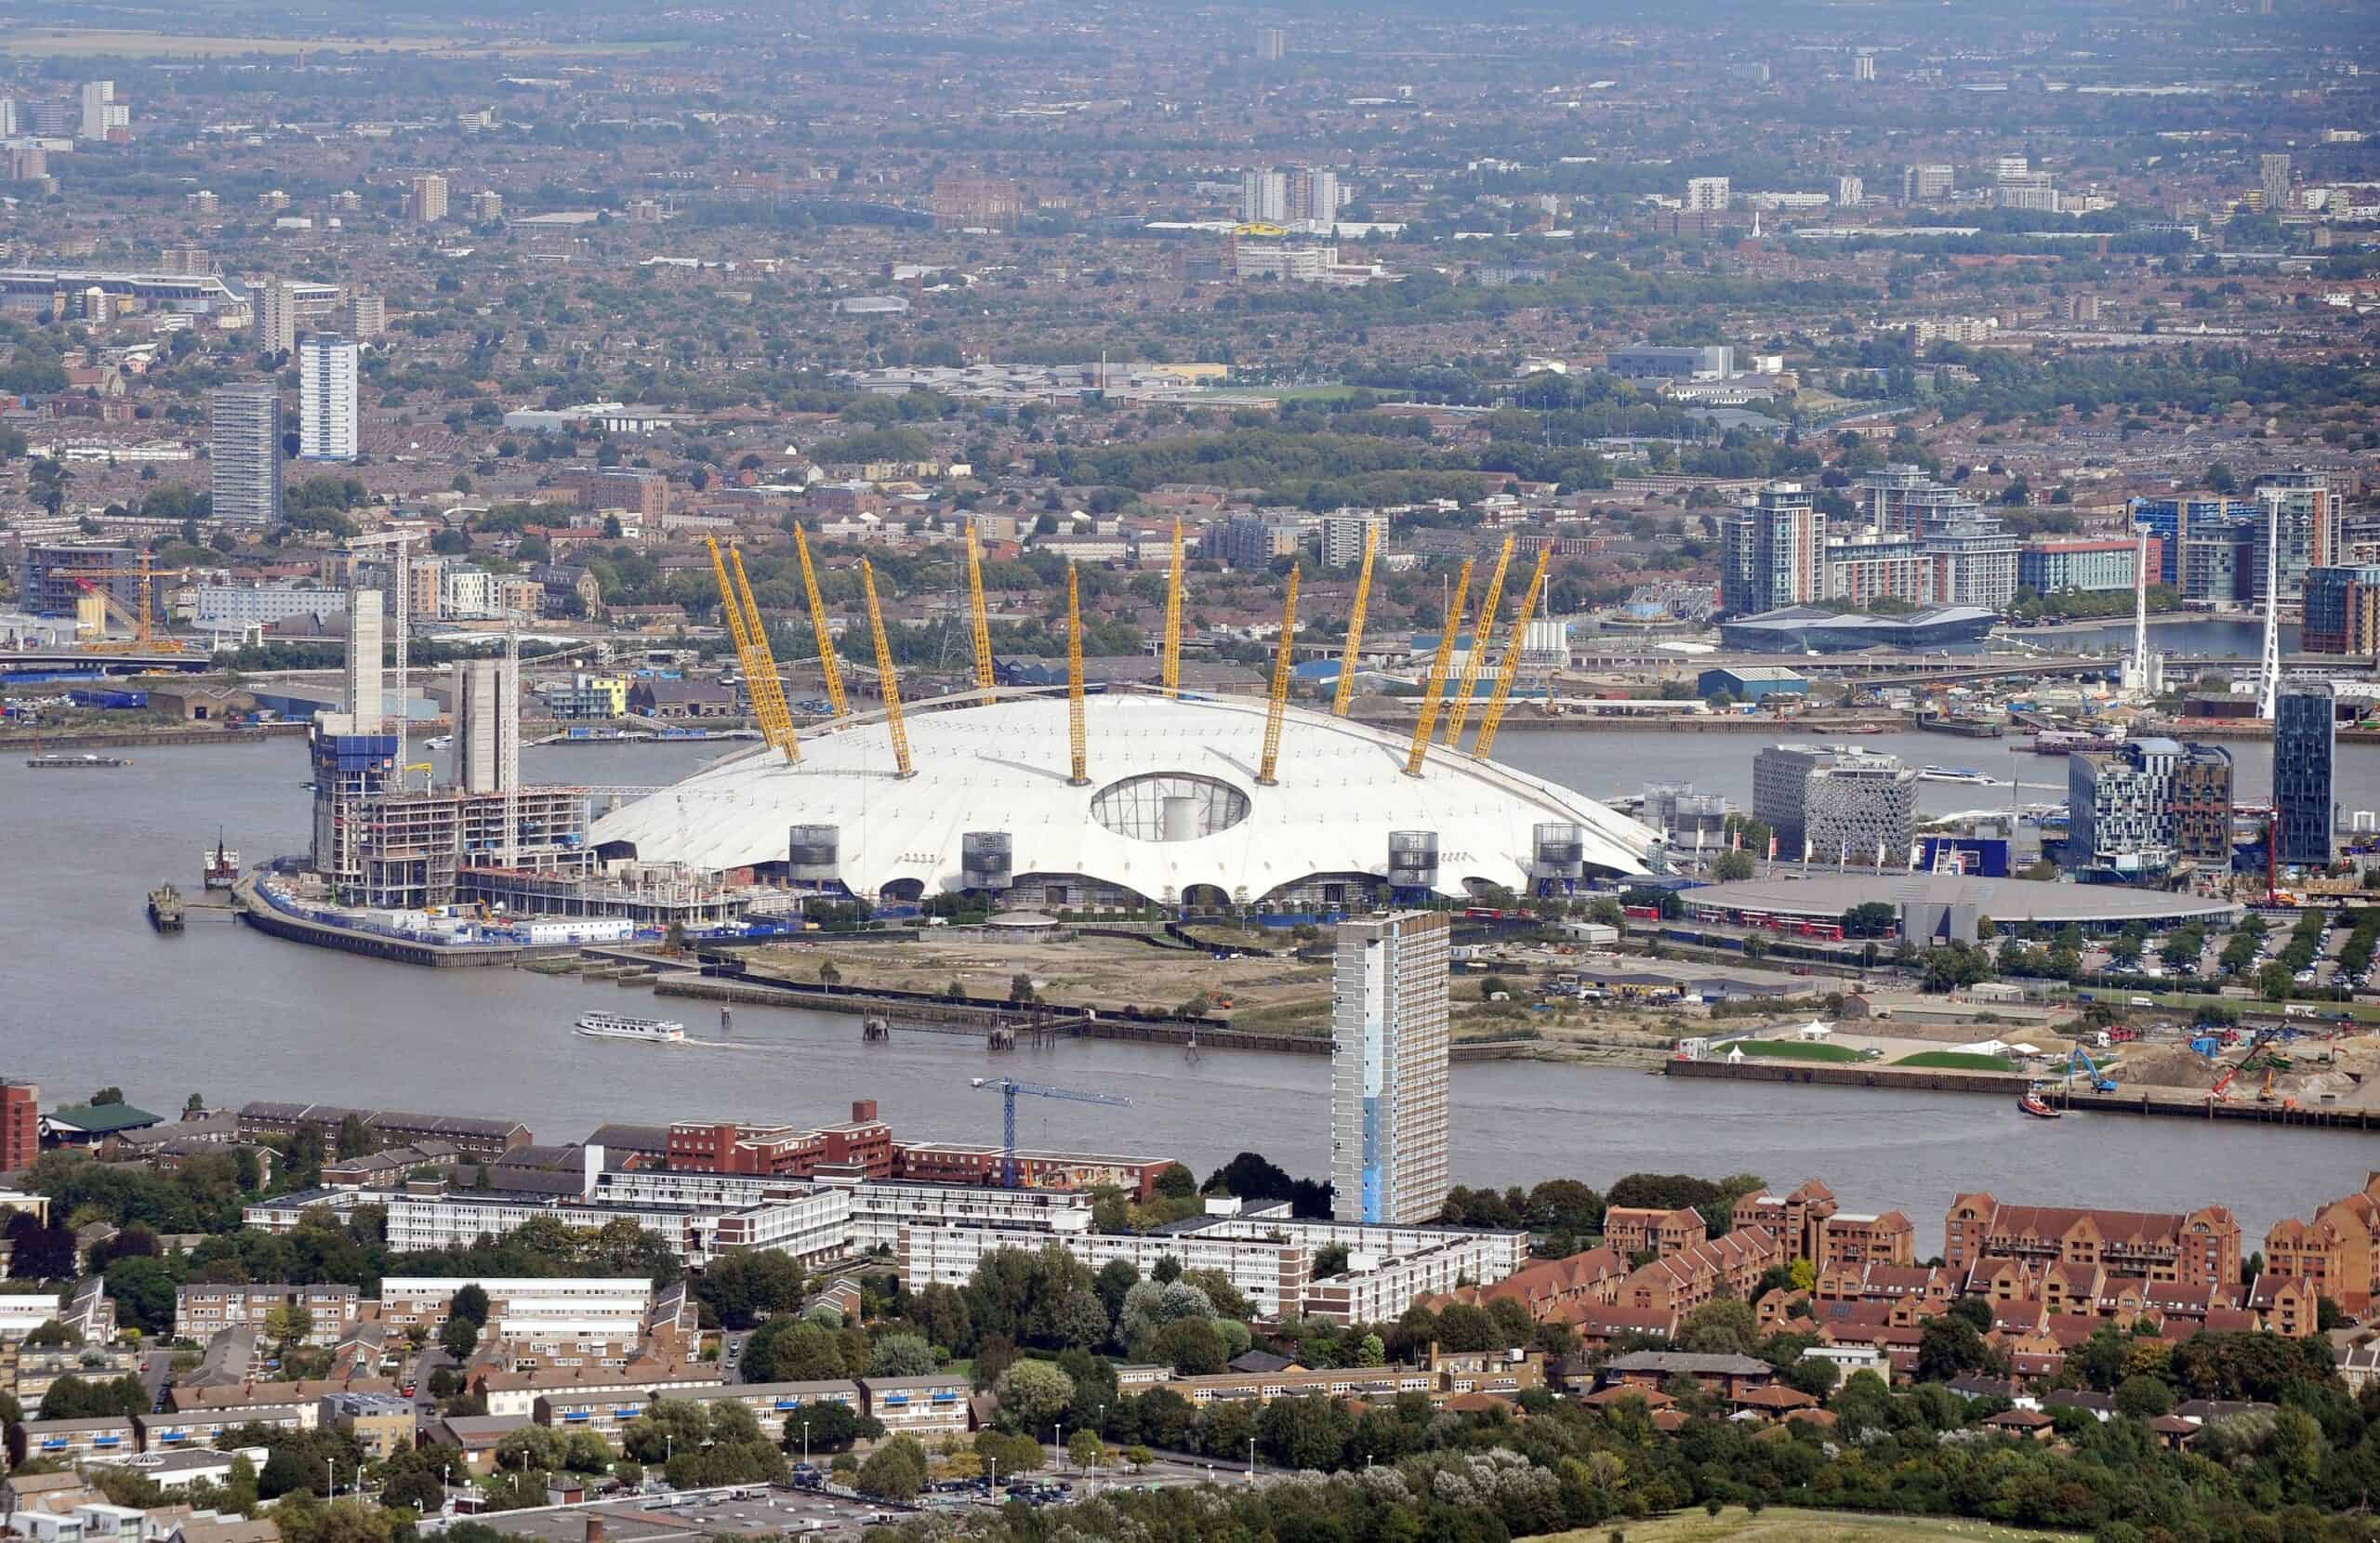 Government considered moving Millennium Dome to Swindon, archived files show